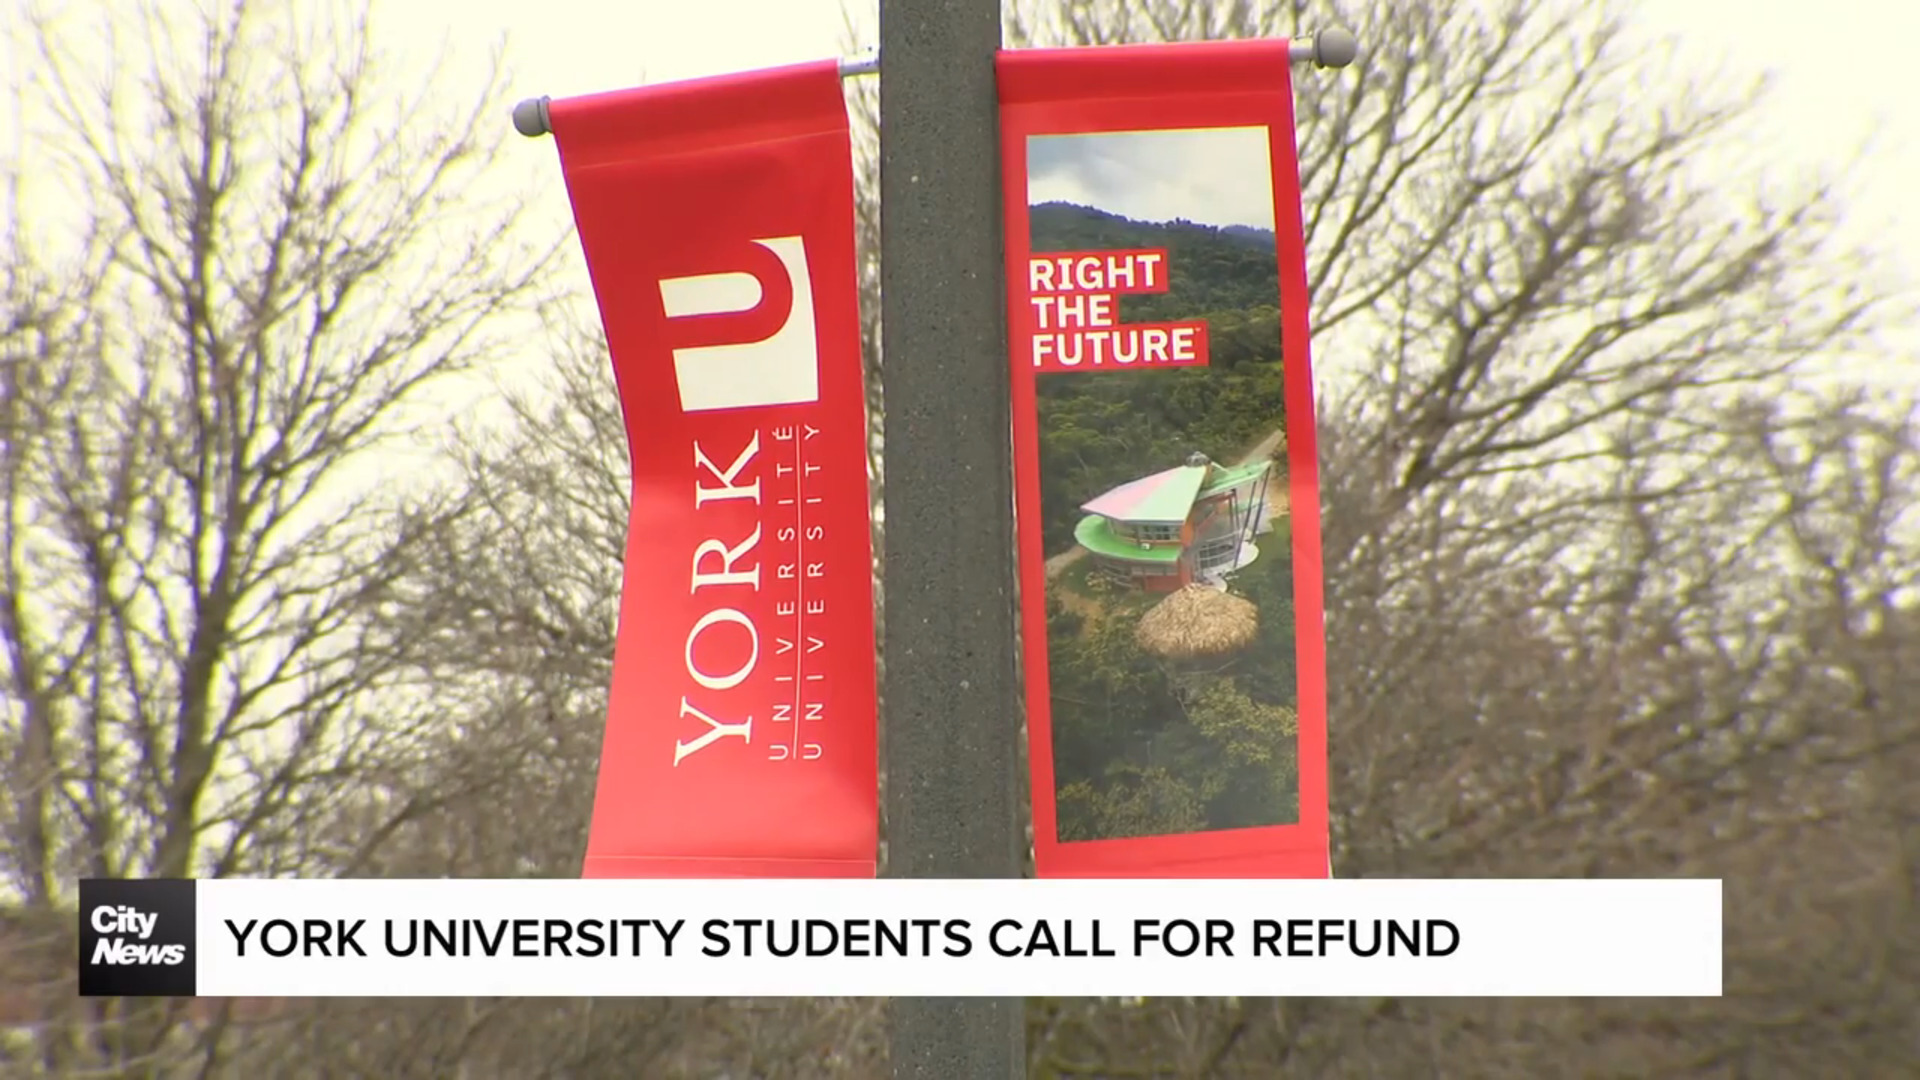 York University students call for refund